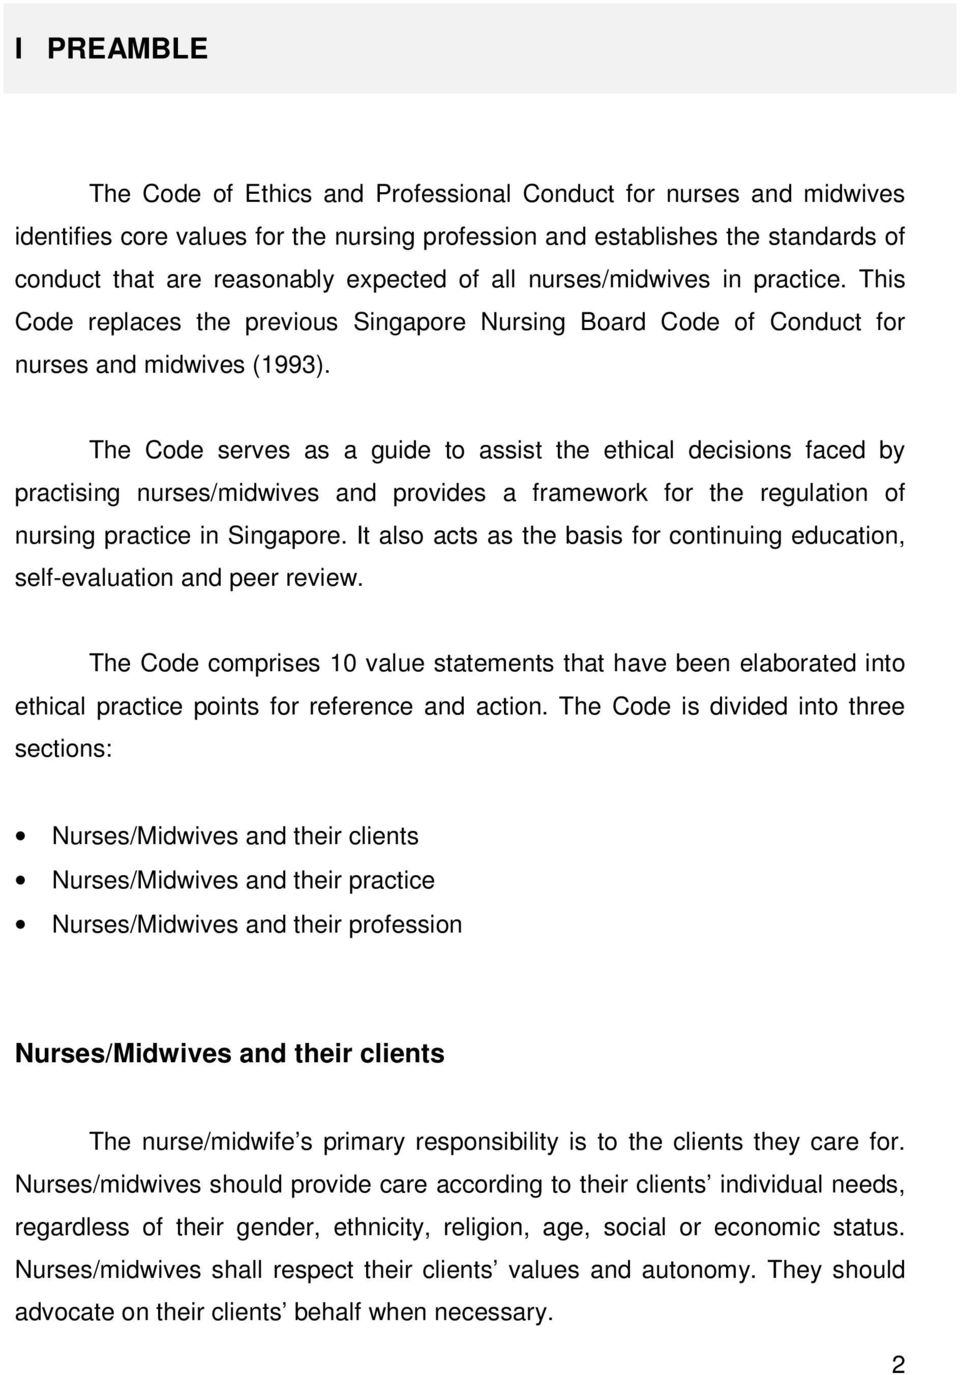 The Code serves as a guide to assist the ethical decisions faced by practising nurses/midwives and provides a framework for the regulation of nursing practice in Singapore.